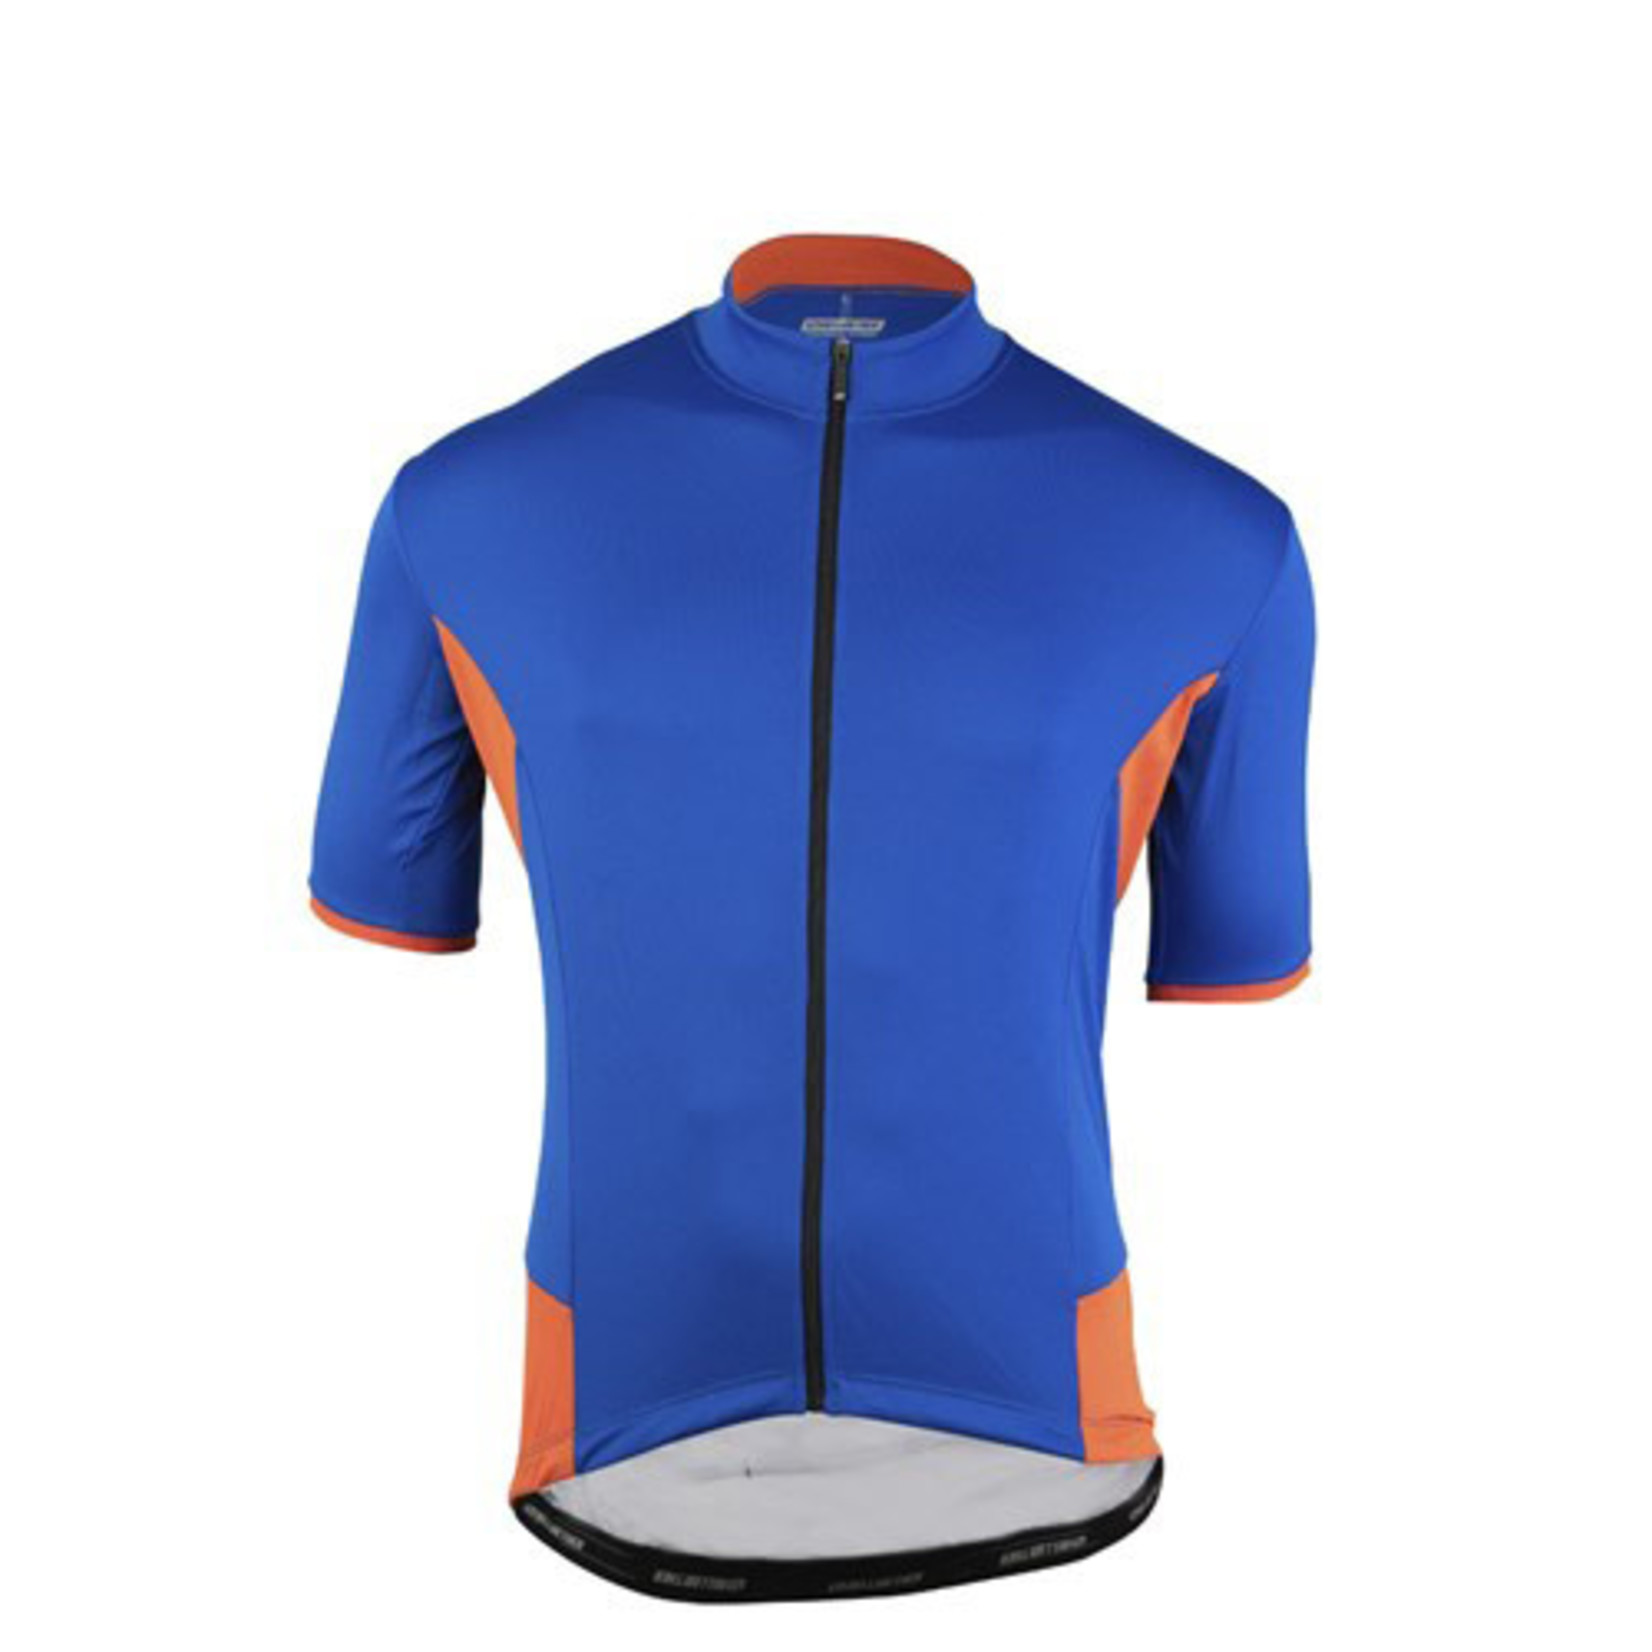 Bellwether Bellwether Men's Distance Jersey - Royal Fabric: Dream-lite™, Nano-Vent™